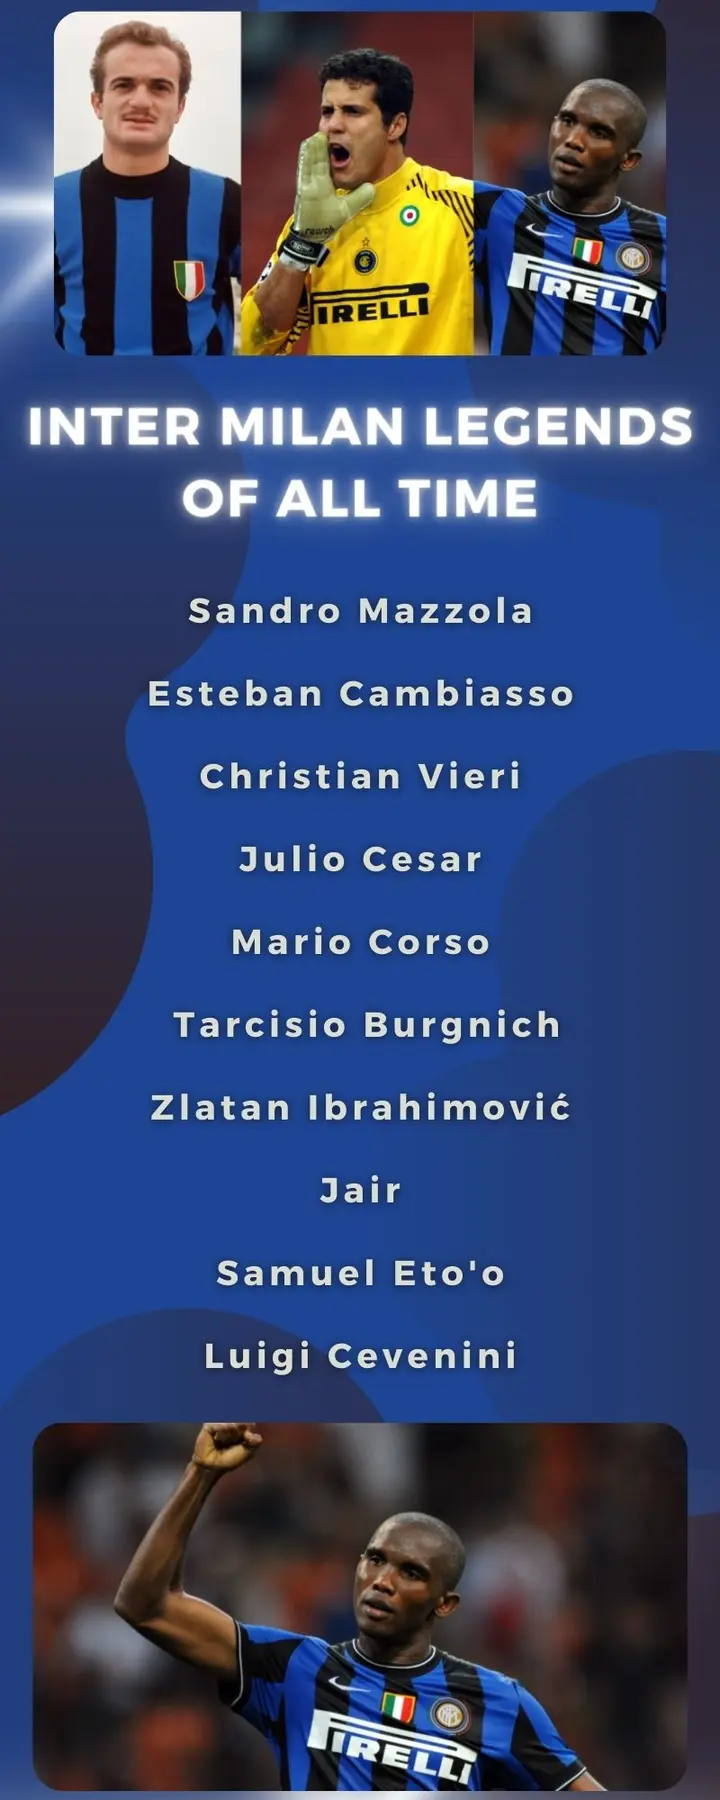 Inter Milan legends of all time